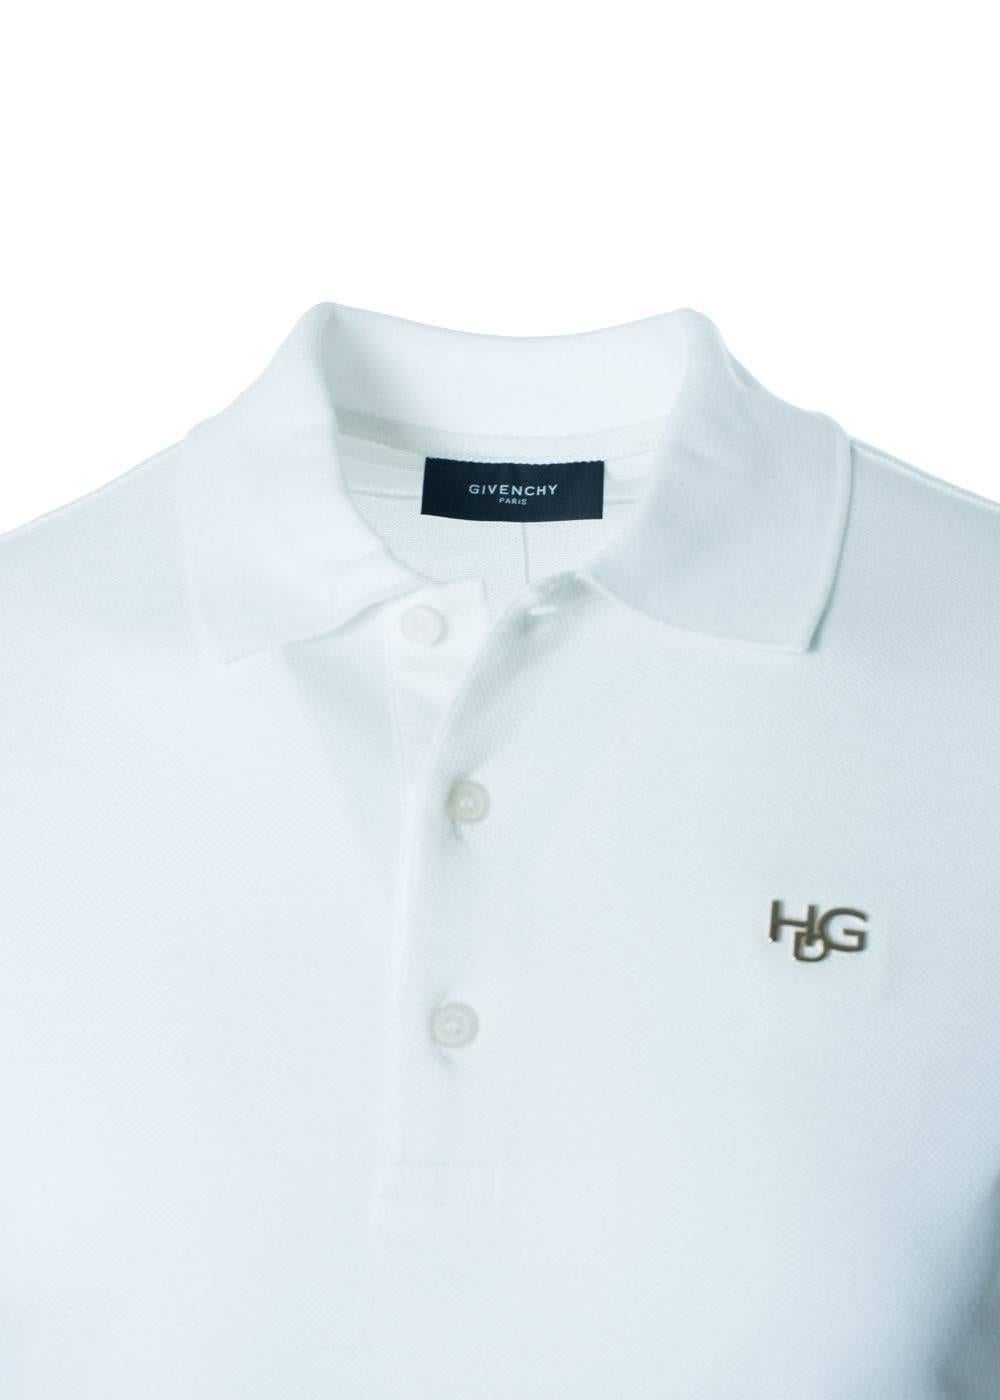 Brand New Givenchy Men's Polo
Original Tags
Retails in Stores & Online for $550
Men's Size Small Fits True to Size

Classic white polo shirt, versatile for any occasion and season especially this hot summer weather. This polo shirt has a silver